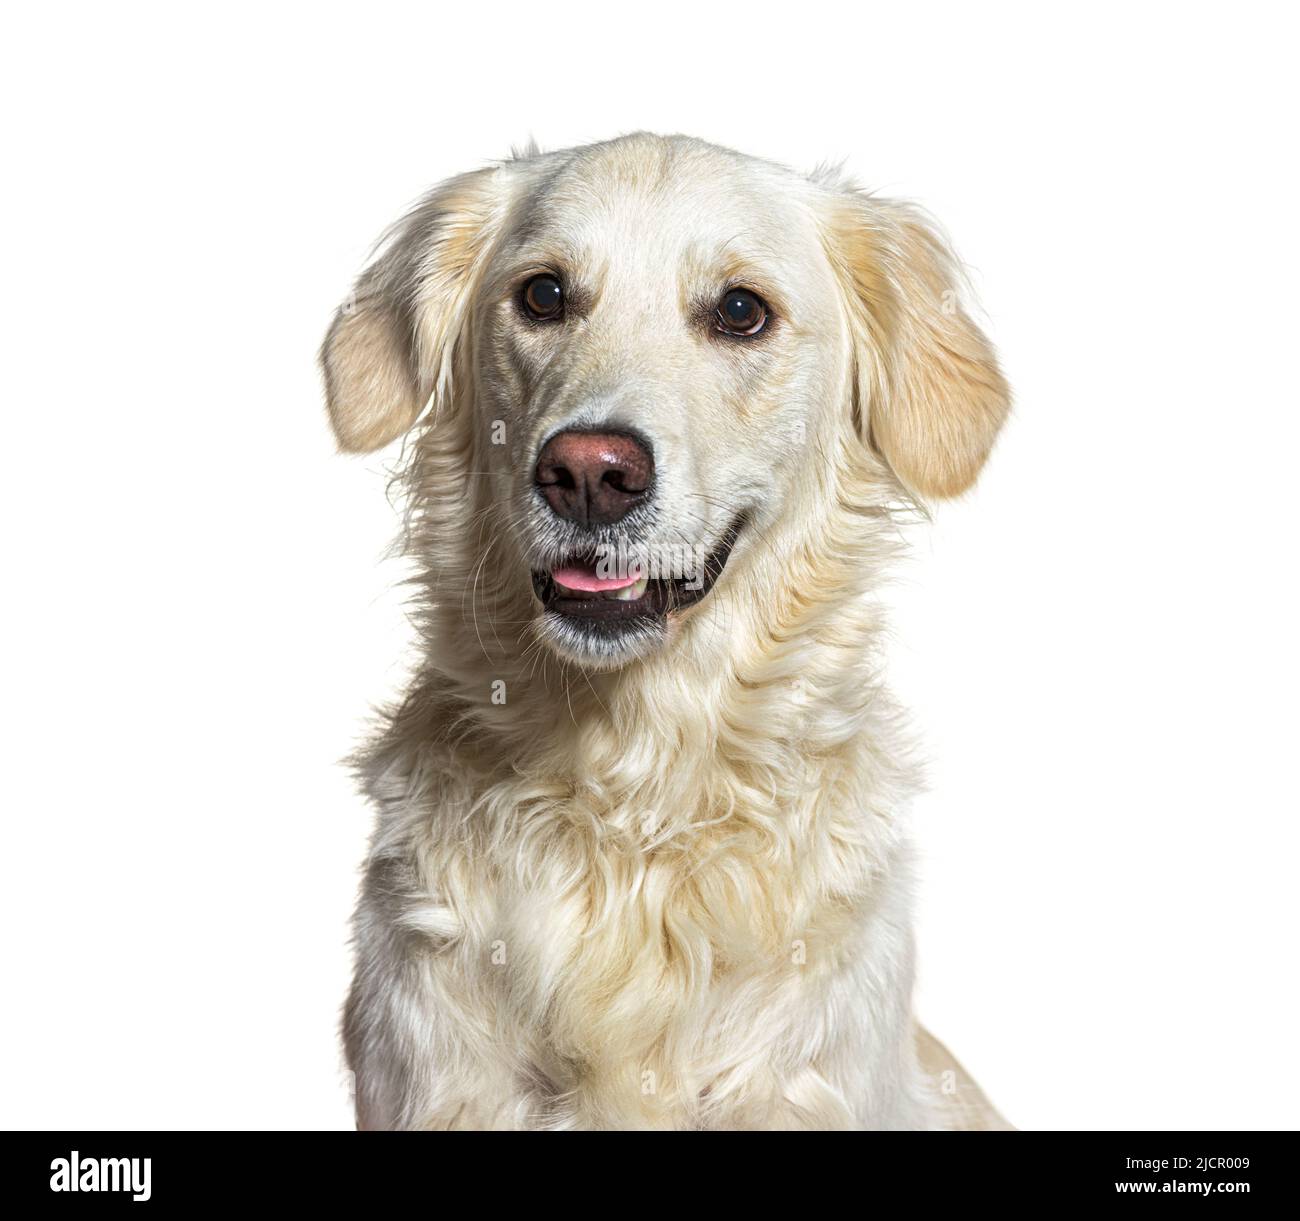 Headshot of a Panting yellow Golden Retriever, isolated on white Stock Photo